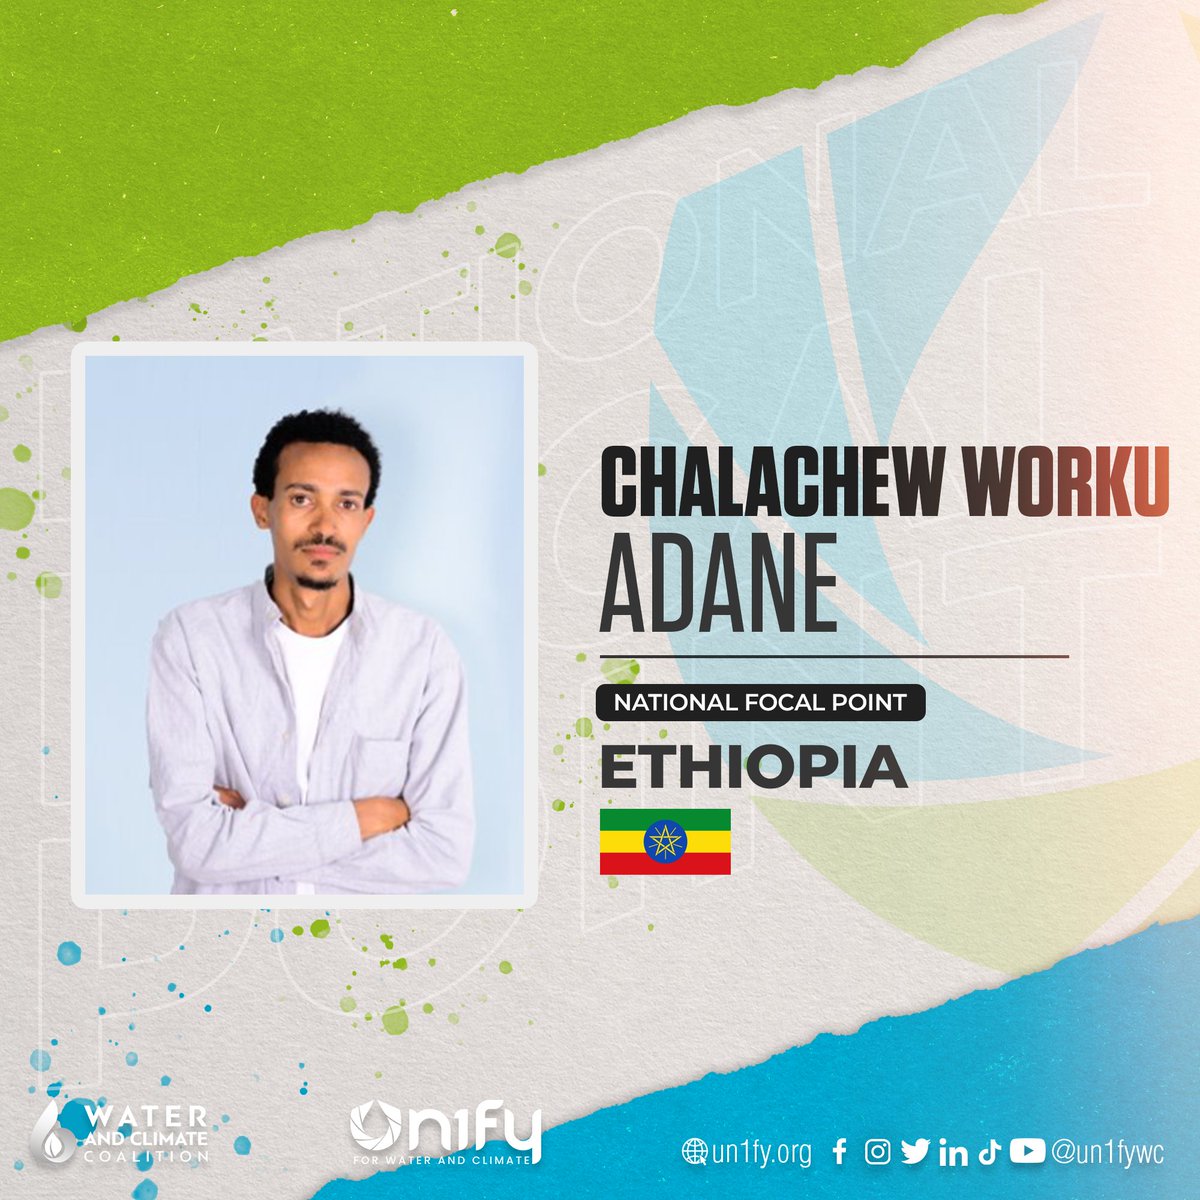 Introducing our National Focal Points for Ethiopia, Fufa Hunduma Banja and Chalachew Worku Adane. Are you from Ethiopia and willing to advocate for water and climate? You can reach them via email at ethiopia@un1fy.org #un2023waterconference #waterandclimate #wateraction #un1fy